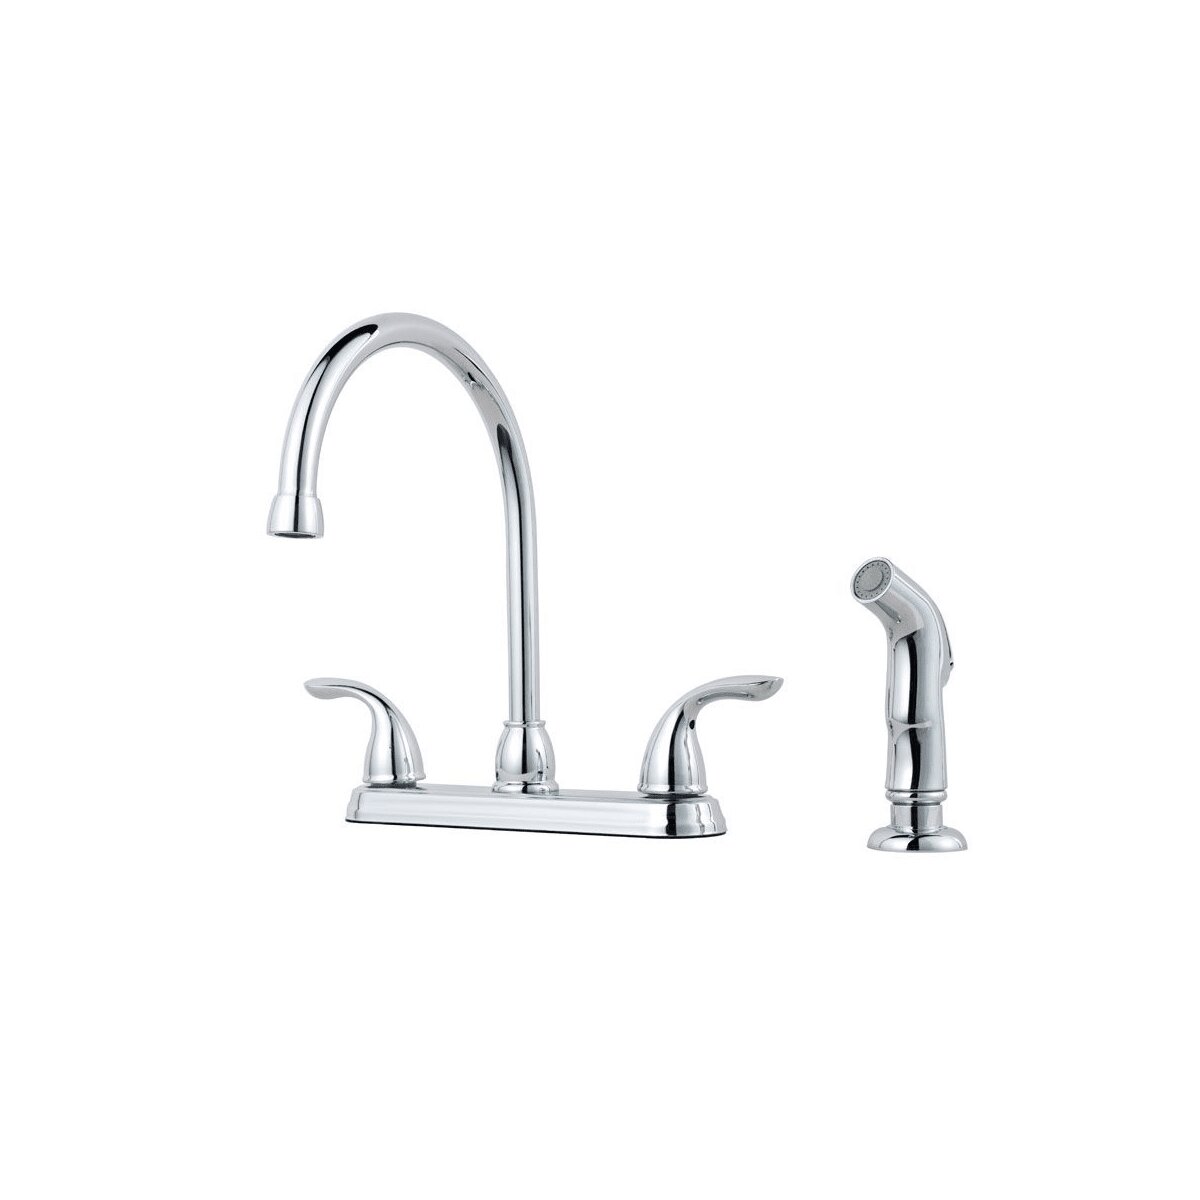 PFISTER G136-500 PFIRST SERIES 11 3/8 INCH TWO LEVER HANDLES DECK MOUNT KITCHEN FAUCET WITH SIDE SPRAY